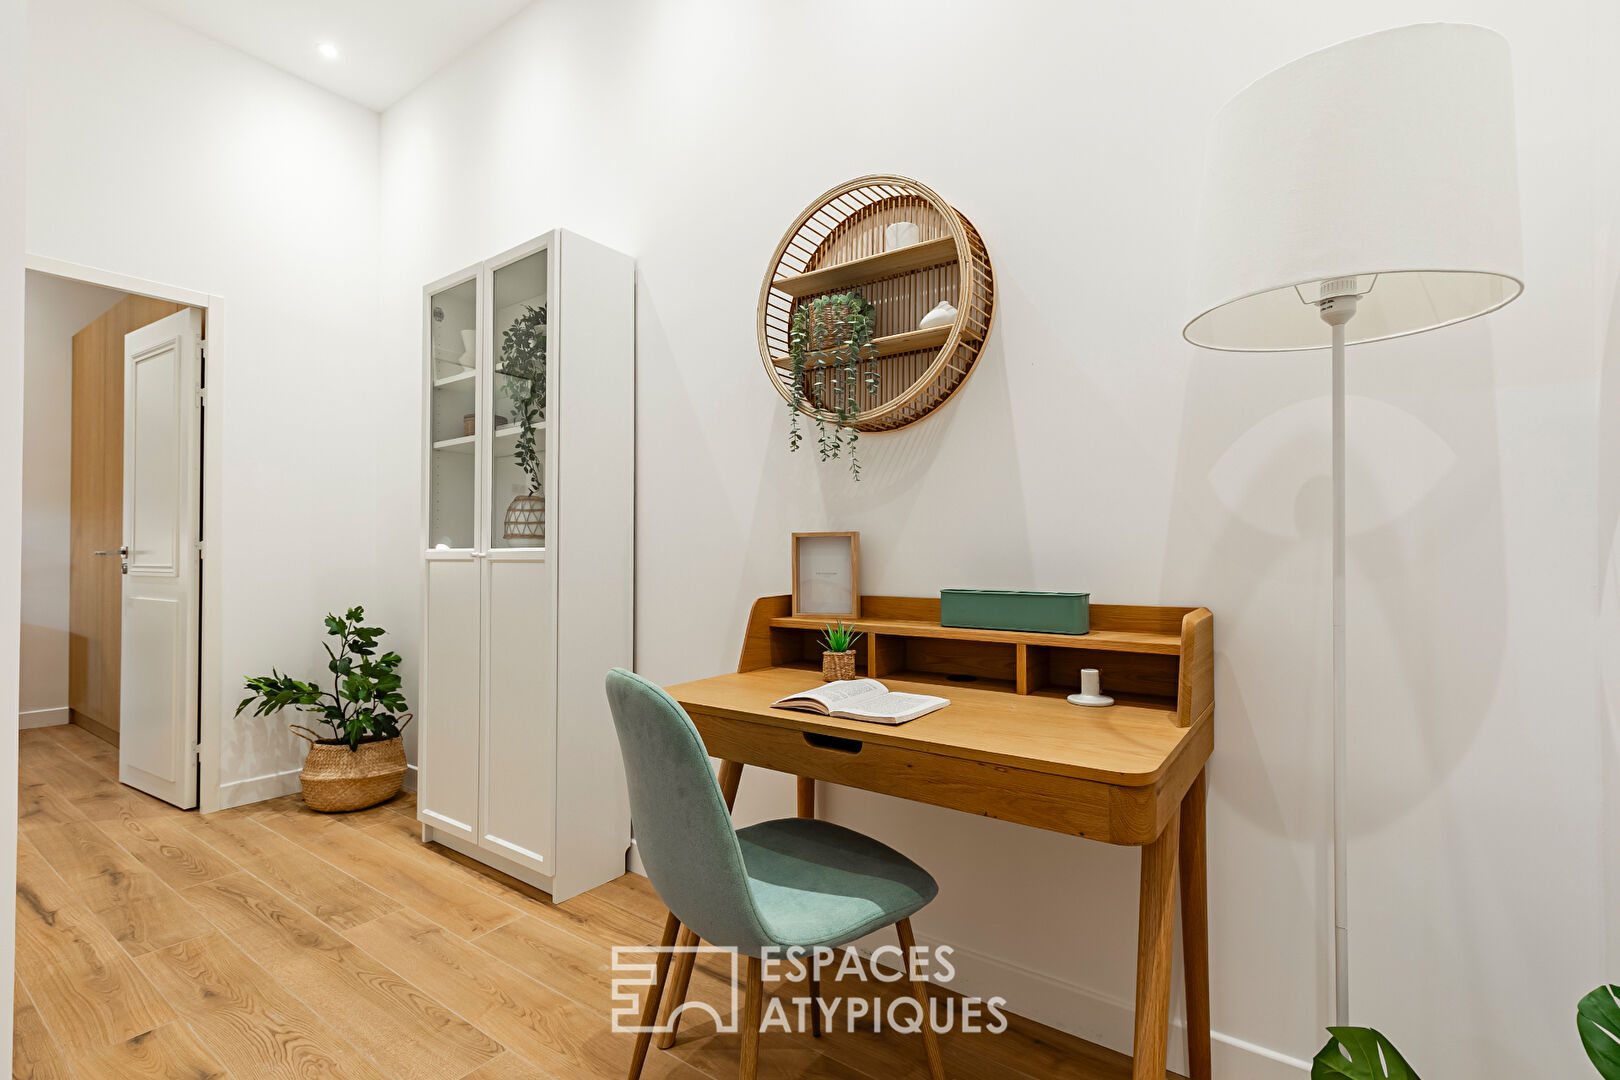 Completely renovated family home in Les Chartrons